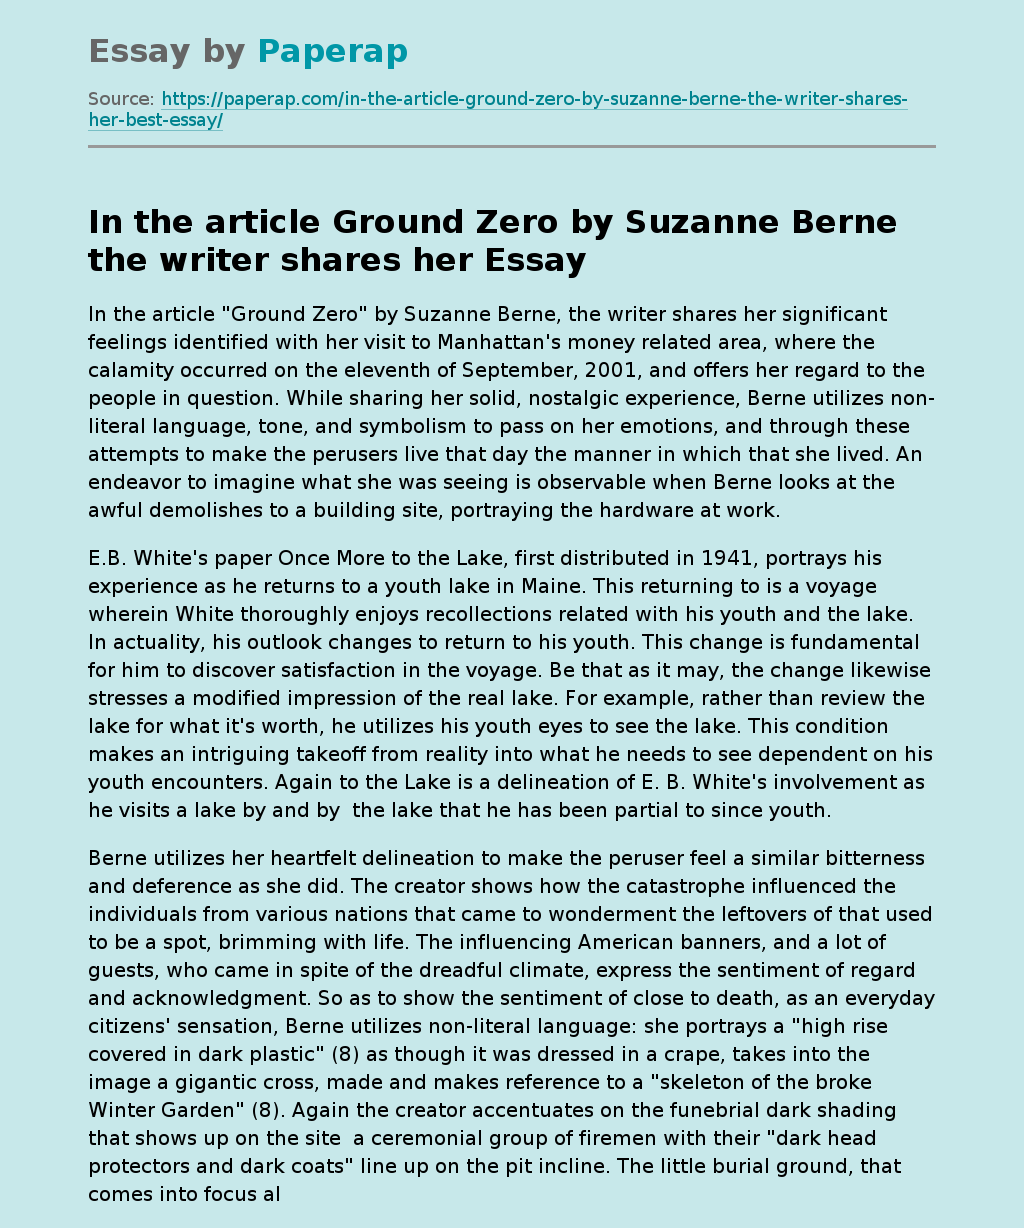 In the article Ground Zero by Suzanne Berne the writer shares her